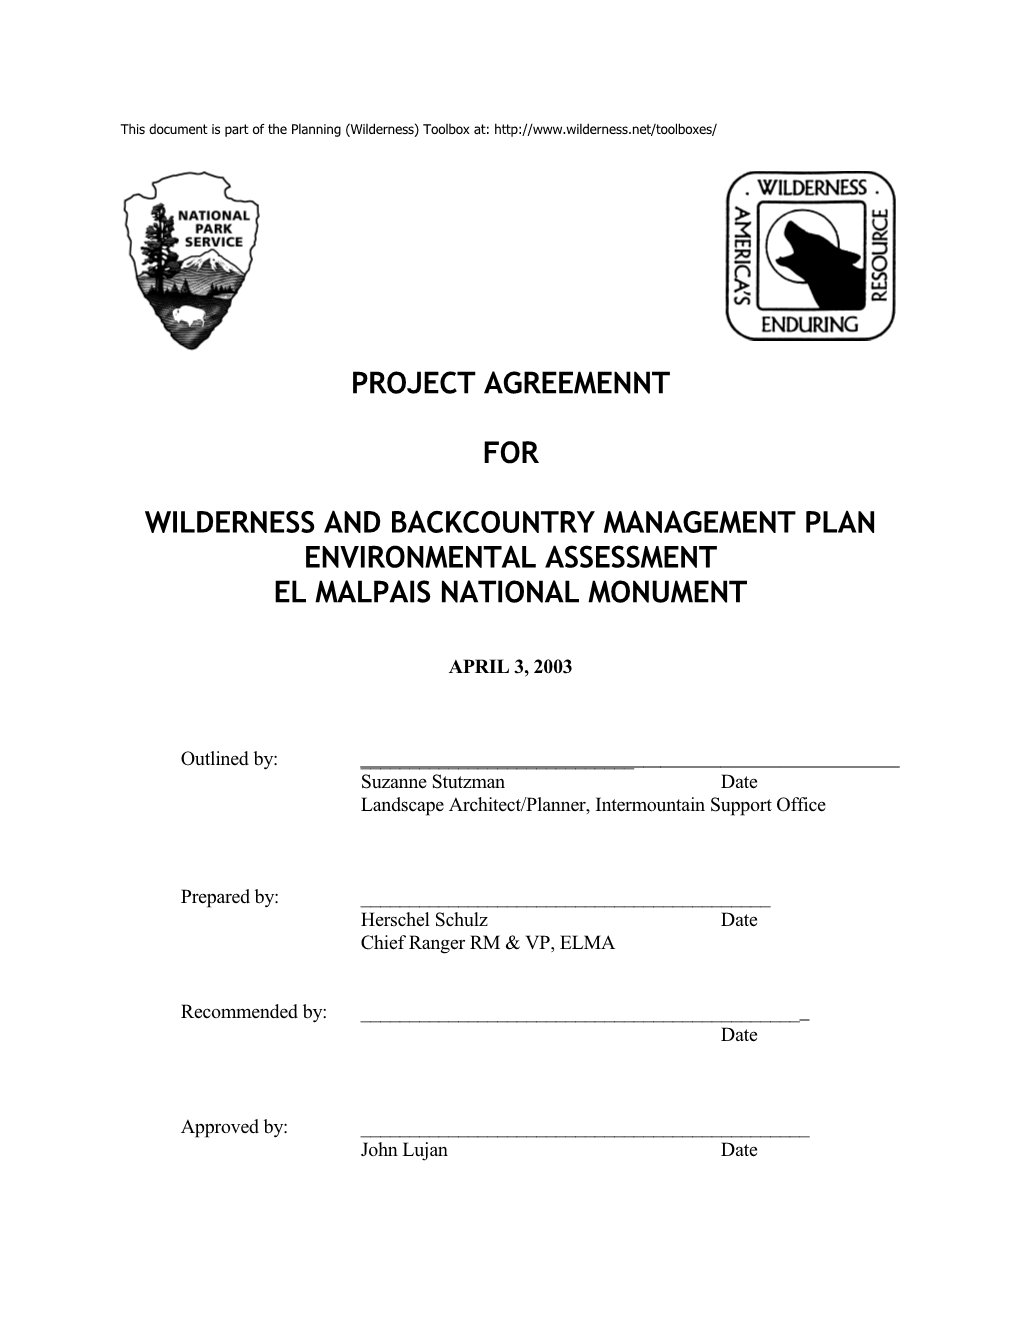 El Malpais National Monument Project Agreement for Wilderness/Backcountry Management Plan